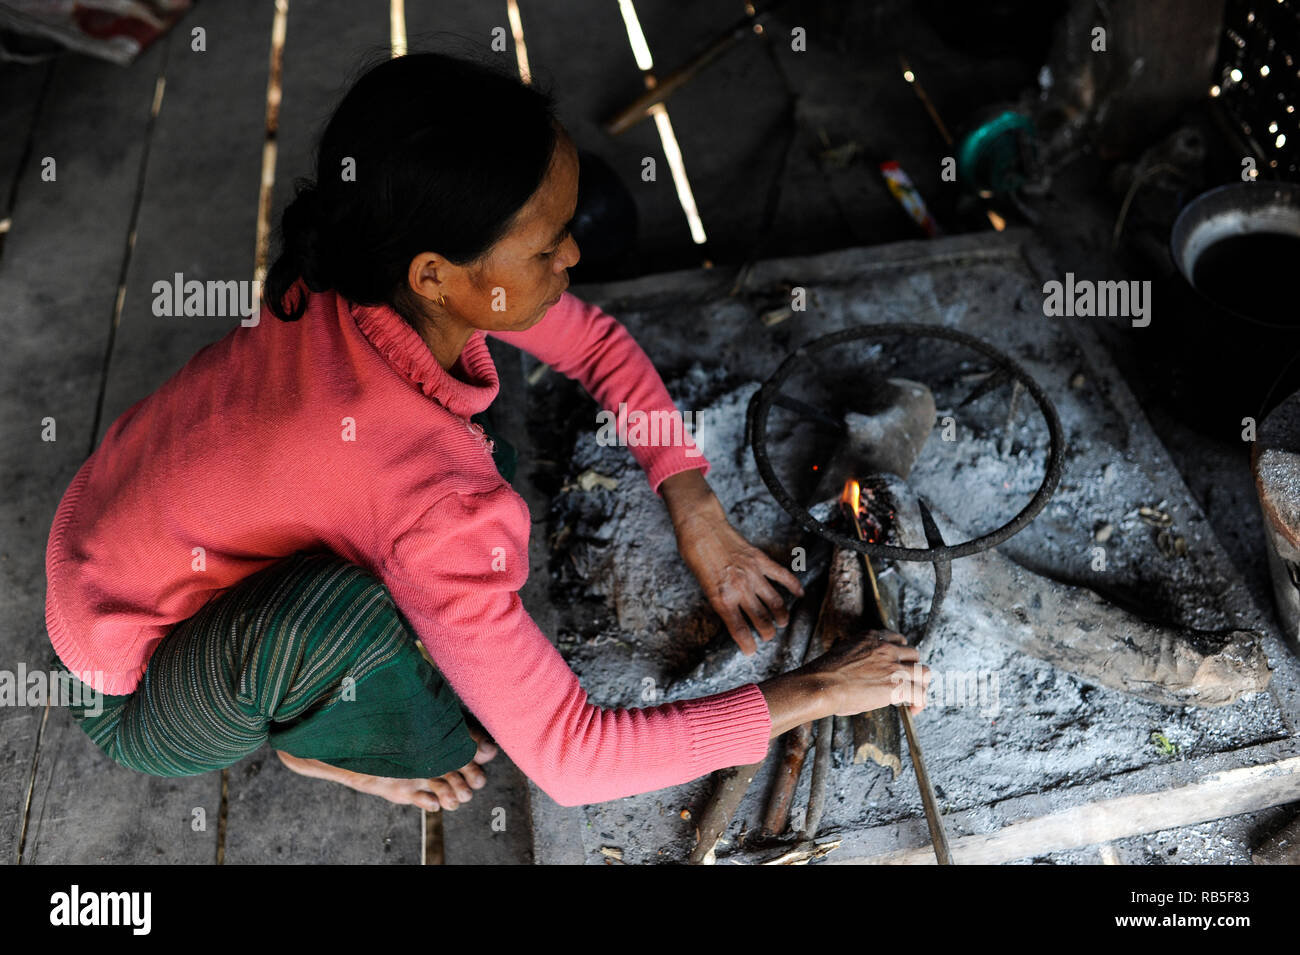 LAO PDR, province Oudomxay , village Houyta, ethnic group Khmu, woman cooks with firewood / LAOS Provinz Oudomxay Dorf Houyta , Ethnie Khmu , Frau Yi kocht mit Feuerholz in ihrer Kueche Stock Photo